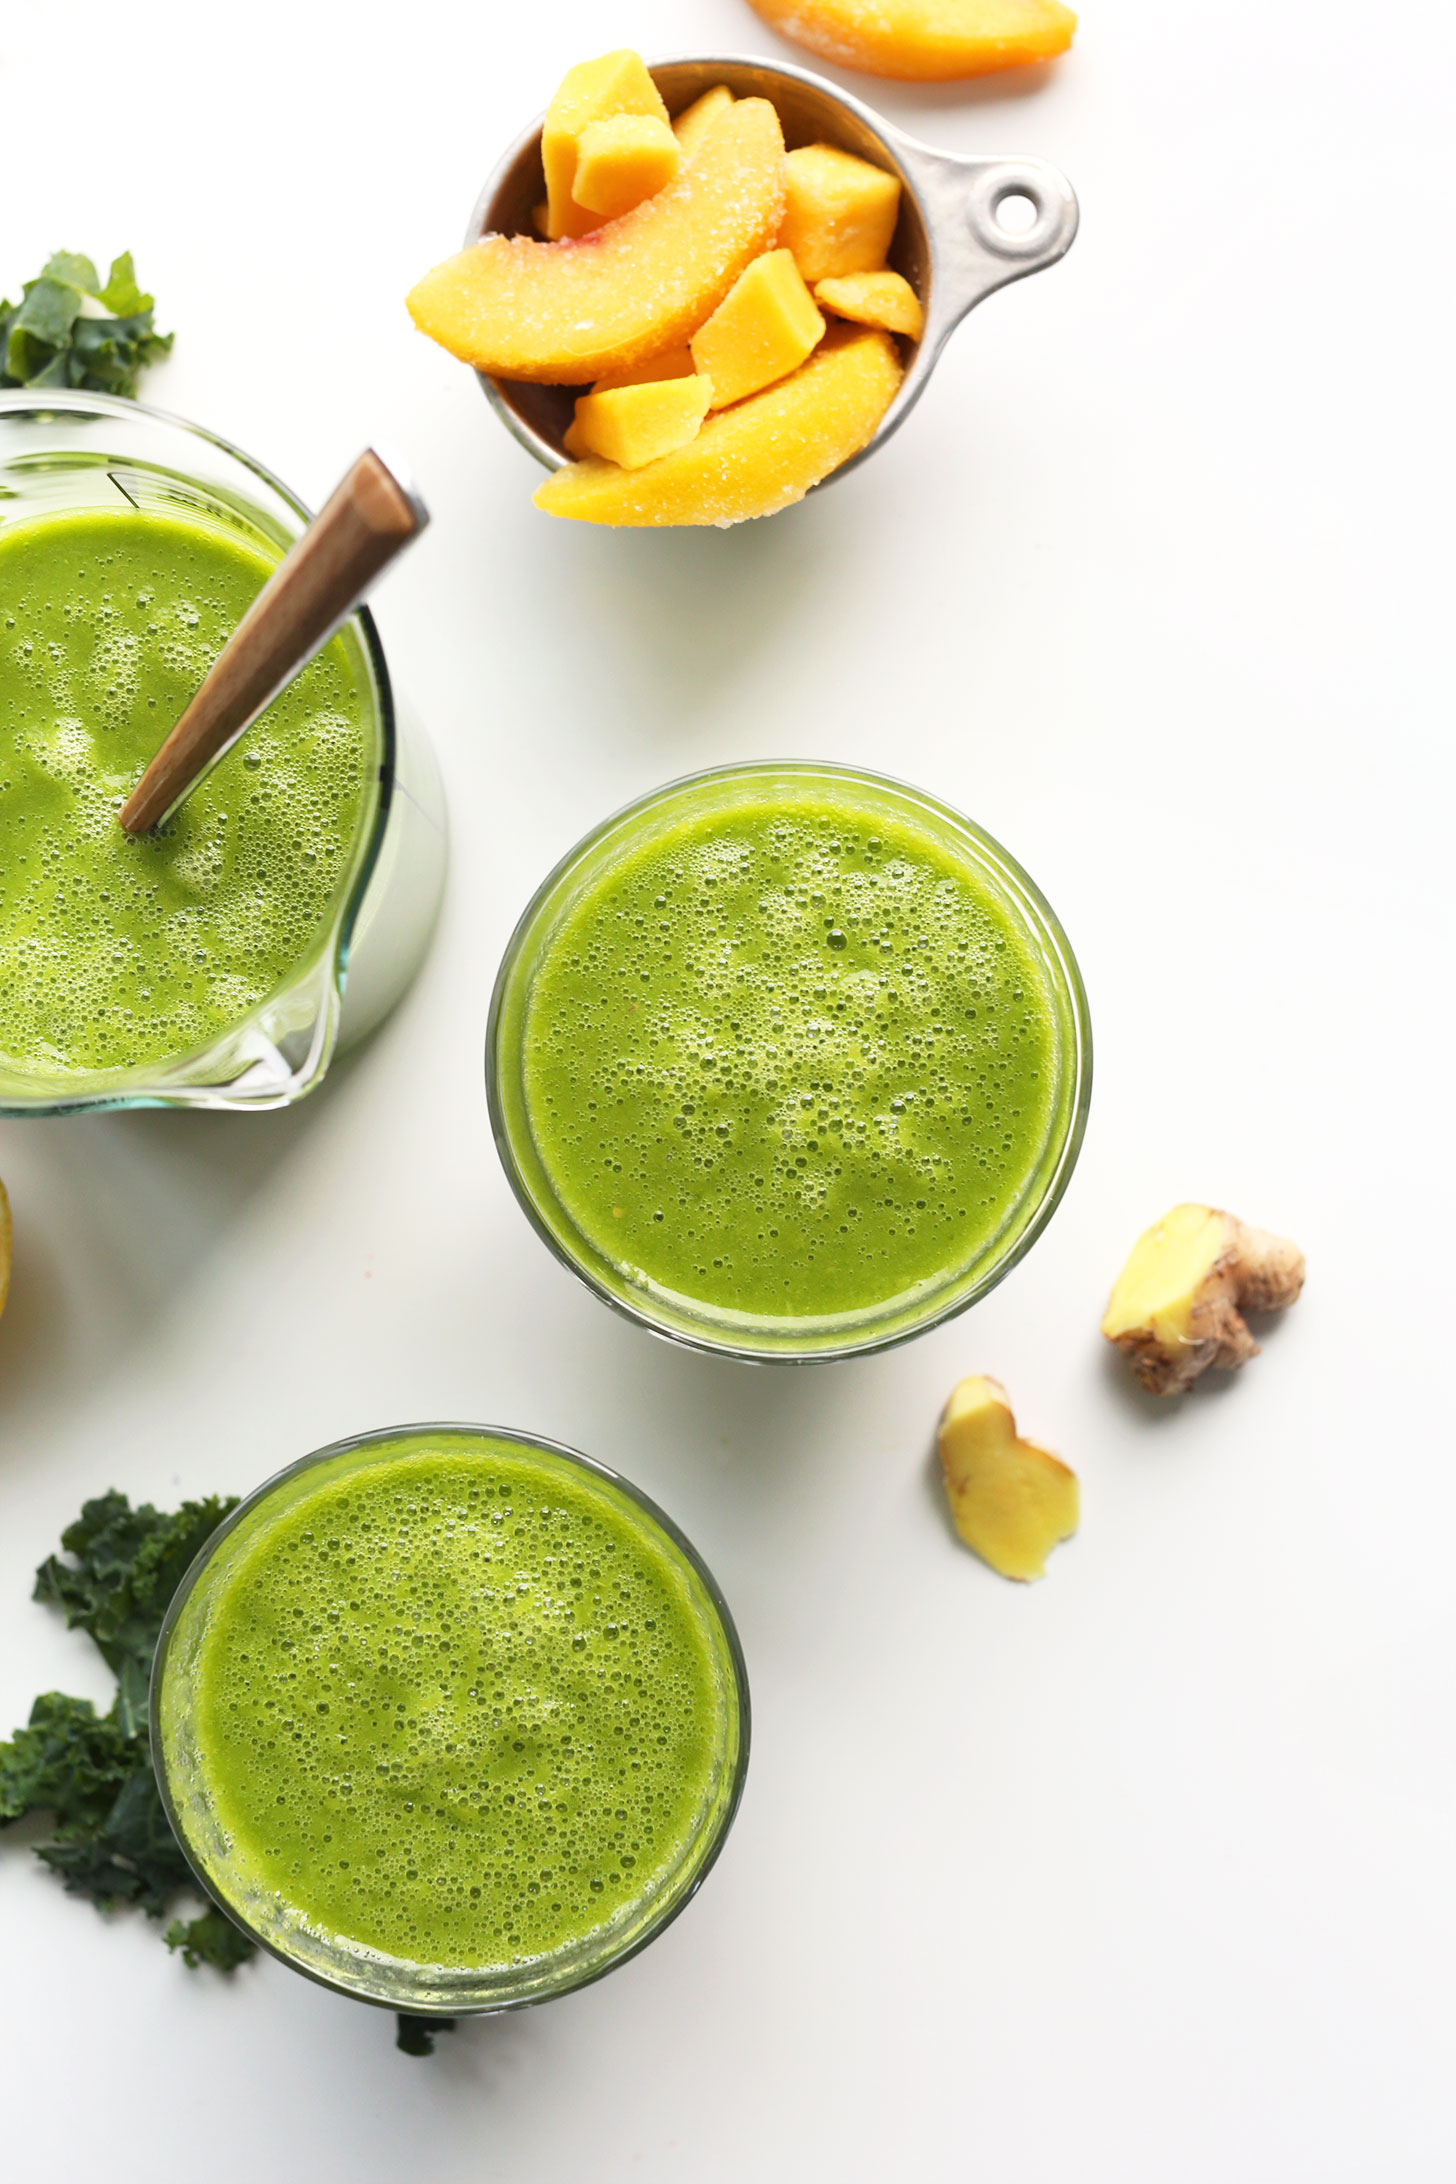 Measuring glass and drinking glasses filled with our Mango Ginger Kale Green Smoothie recipe